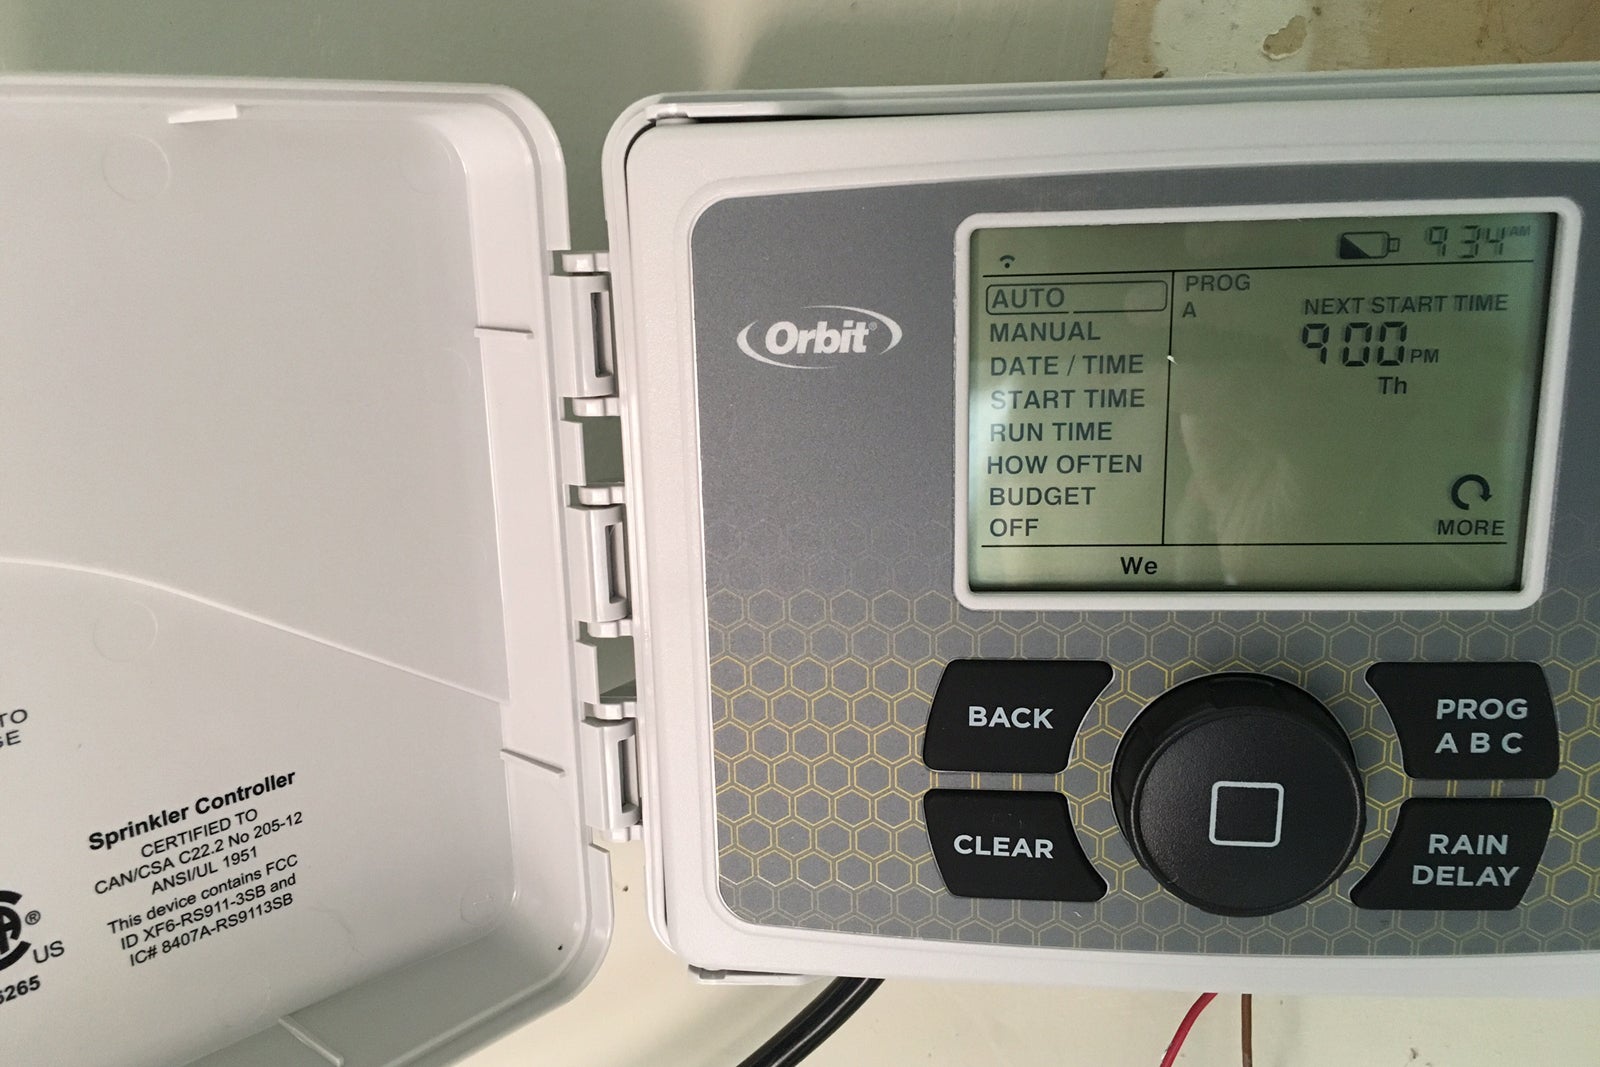 Orbit B hyve Wifi Sprinkler Timer Review Two Ways To Control Your 